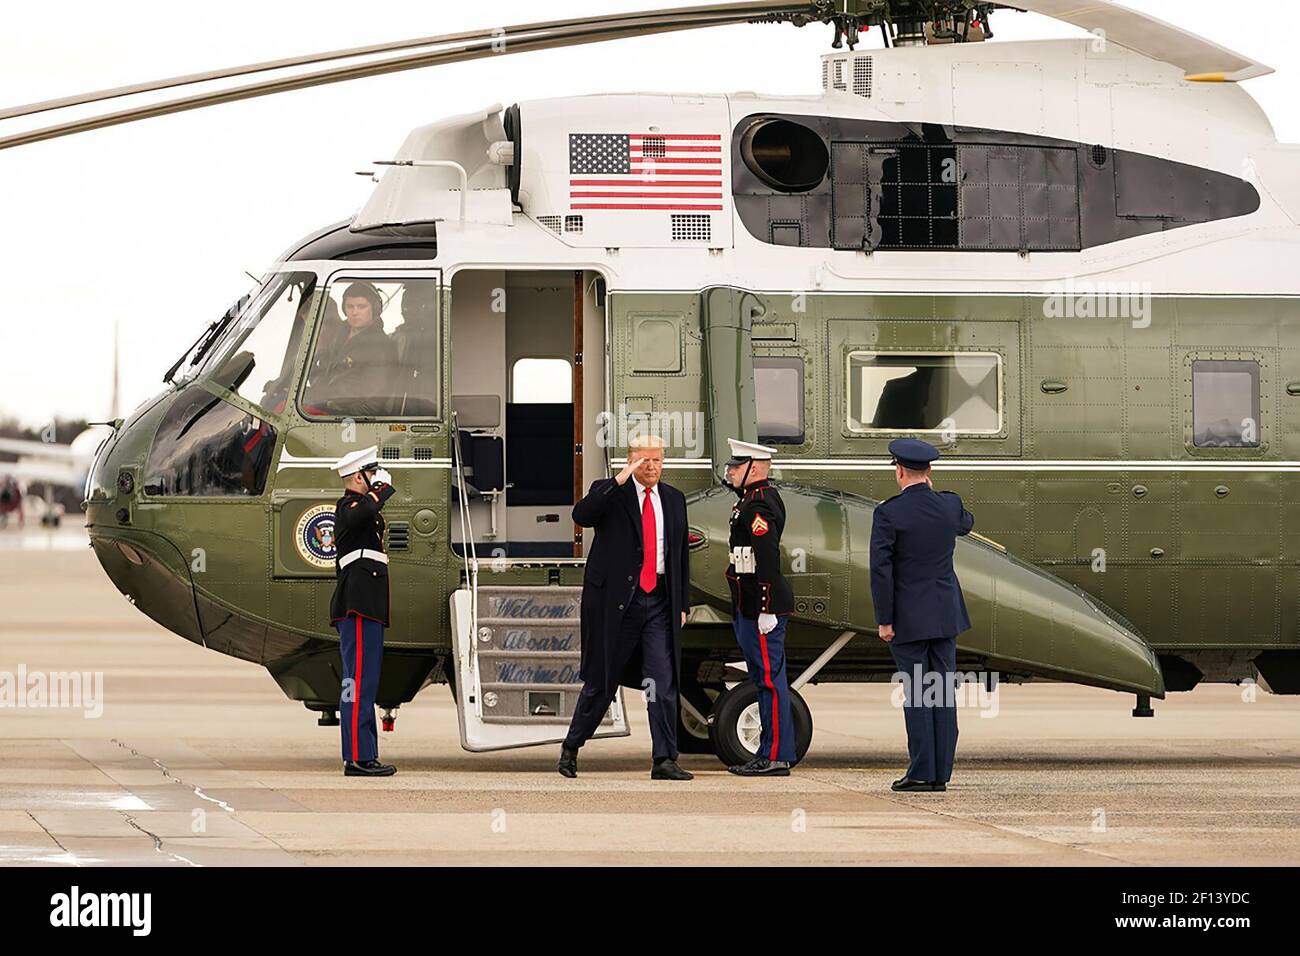 President Donald Trump disembarks Marine One and is met by U.S. Air Force Col. D.W. Schmidt Commander of the 89th Airlift Wing at Joint Base Andrews Md. Friday Feb. 7 2020 prior to boarding Air Force One for his trip to Charlotte N.C. Stock Photo